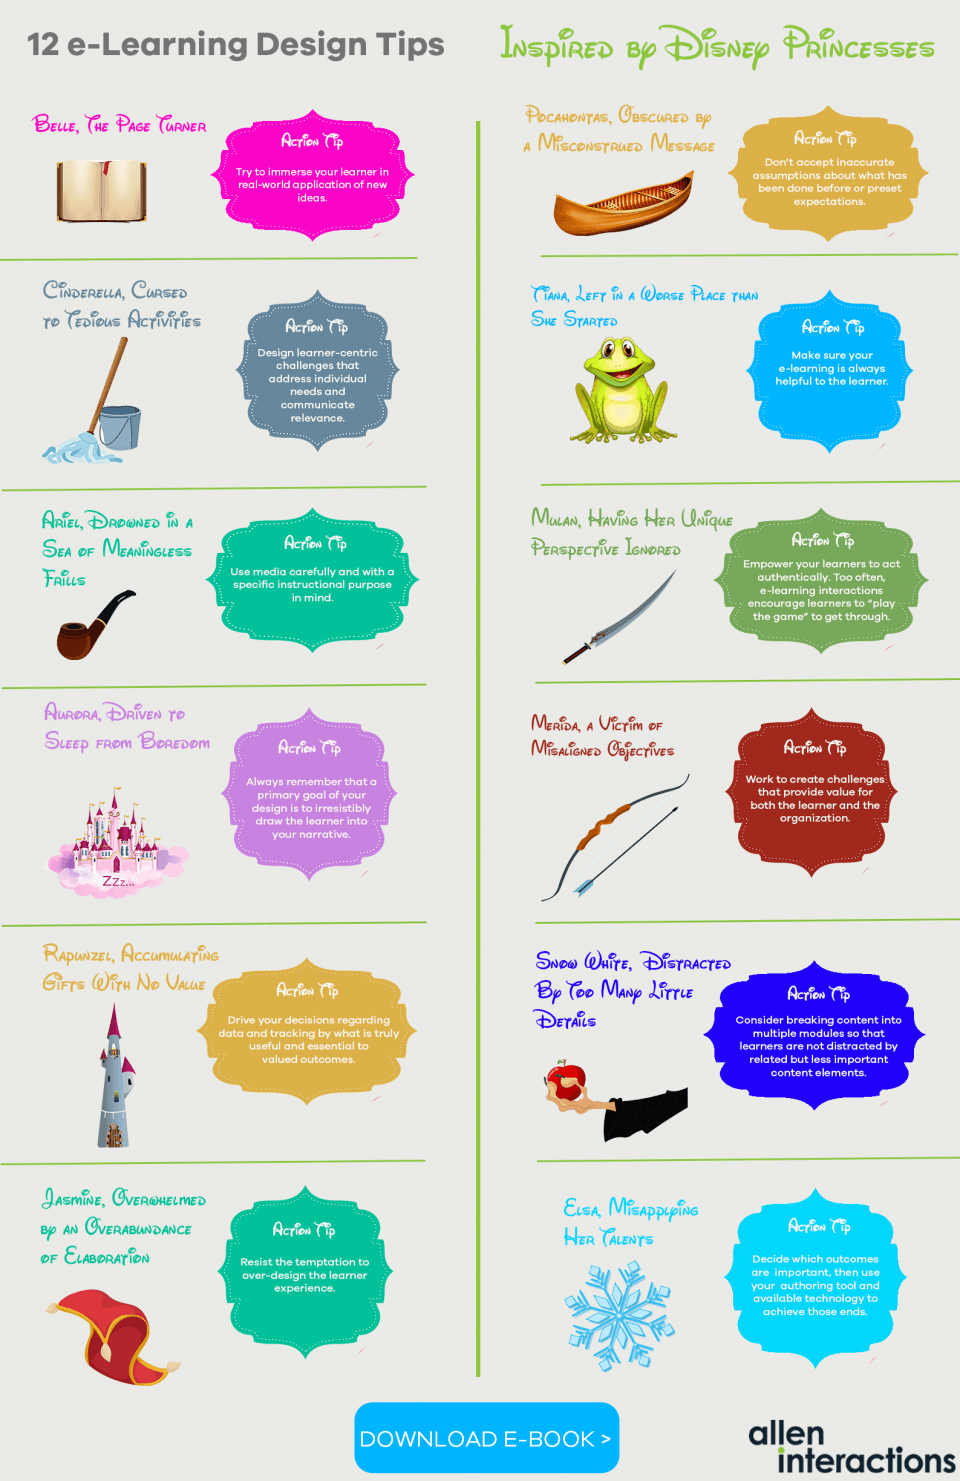 12 eLearning Design Tips Inspired by Disney Princesses Infographic